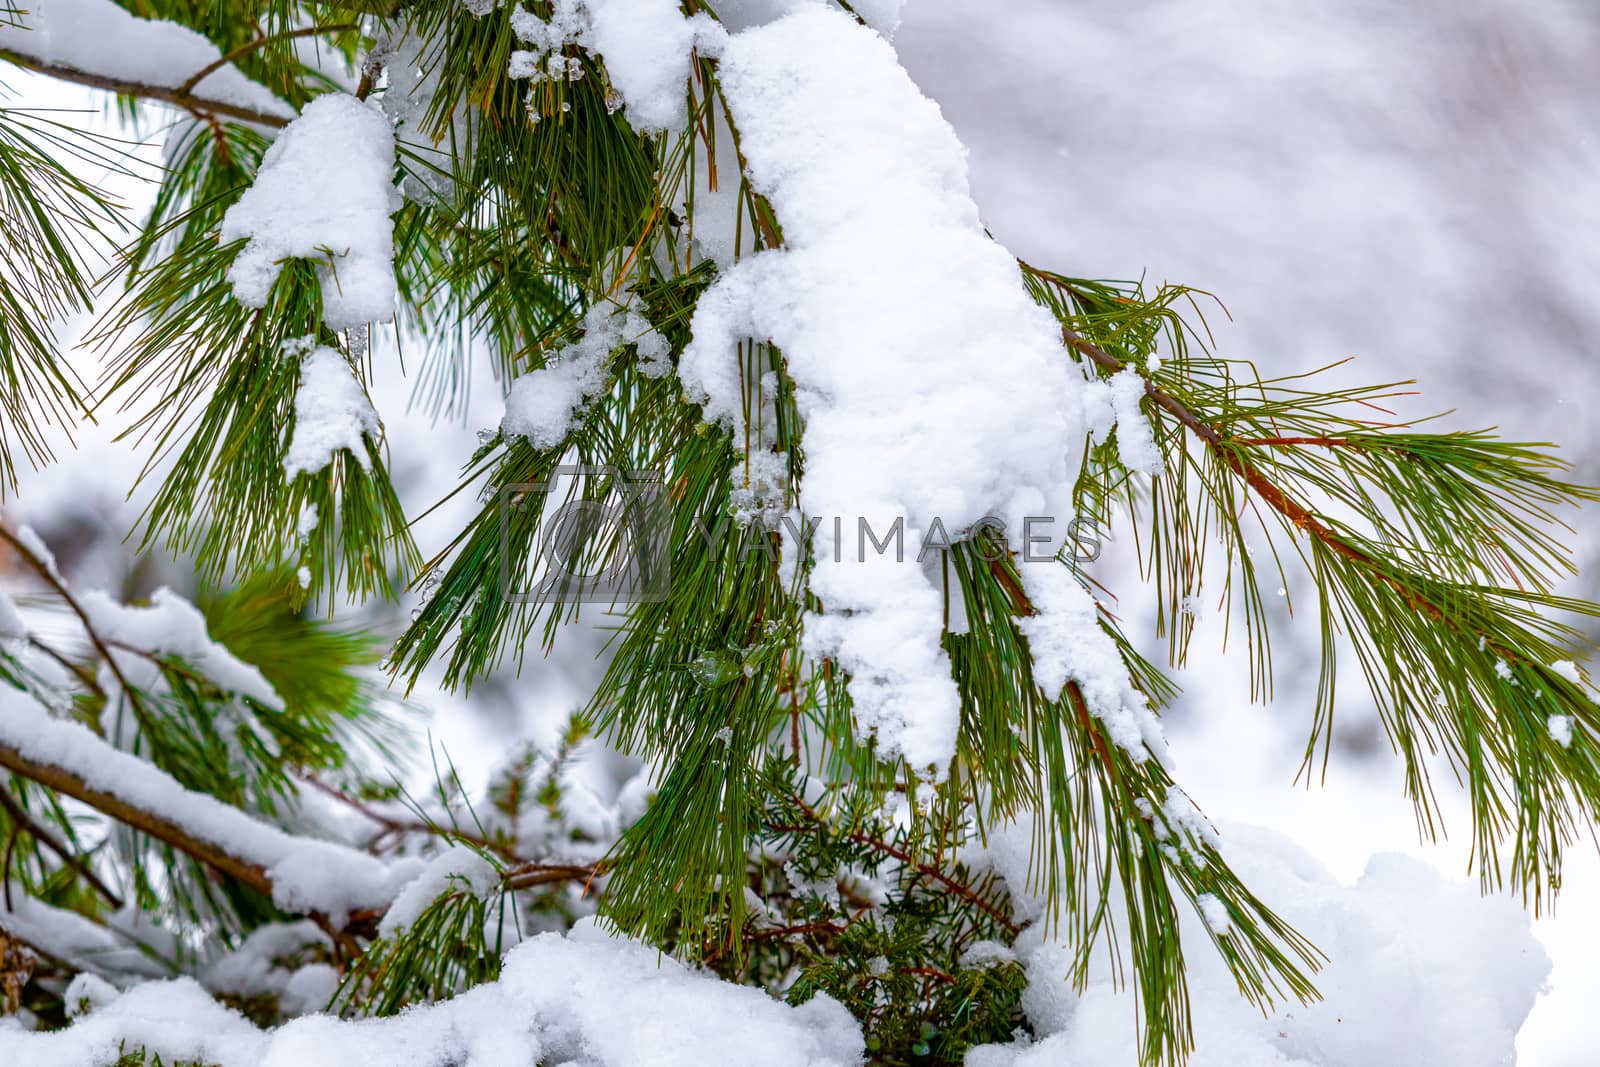 Royalty free image of Evergreen Branches & Needles Weighed Down By Snow by colintemple